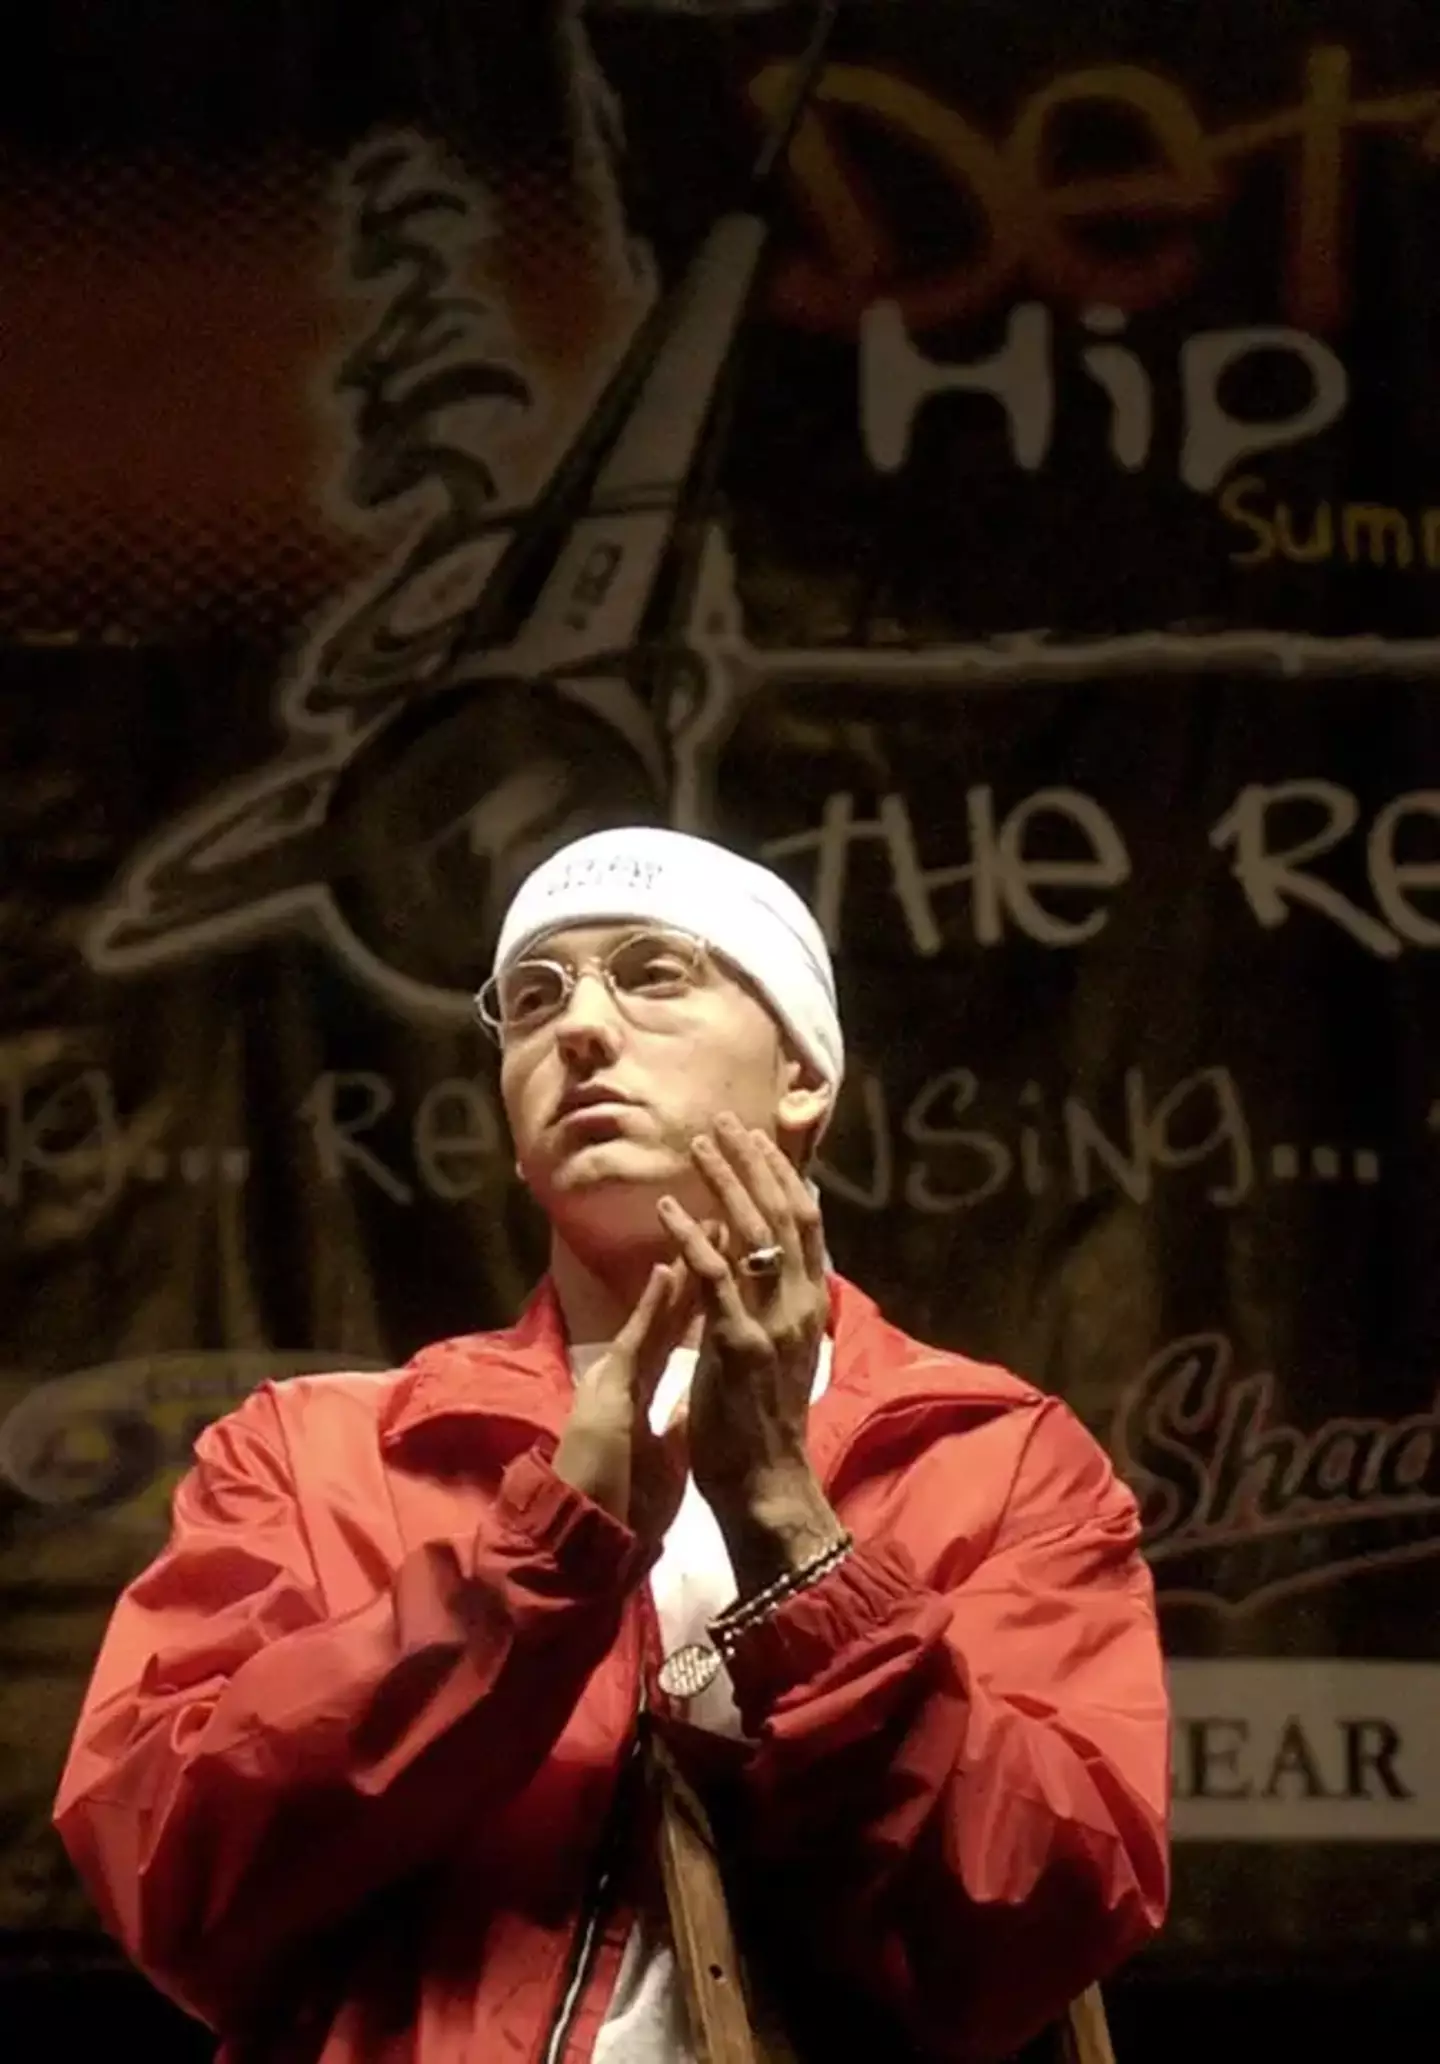 Eminem in 2003, before the supposed car accident that 'killed him'.